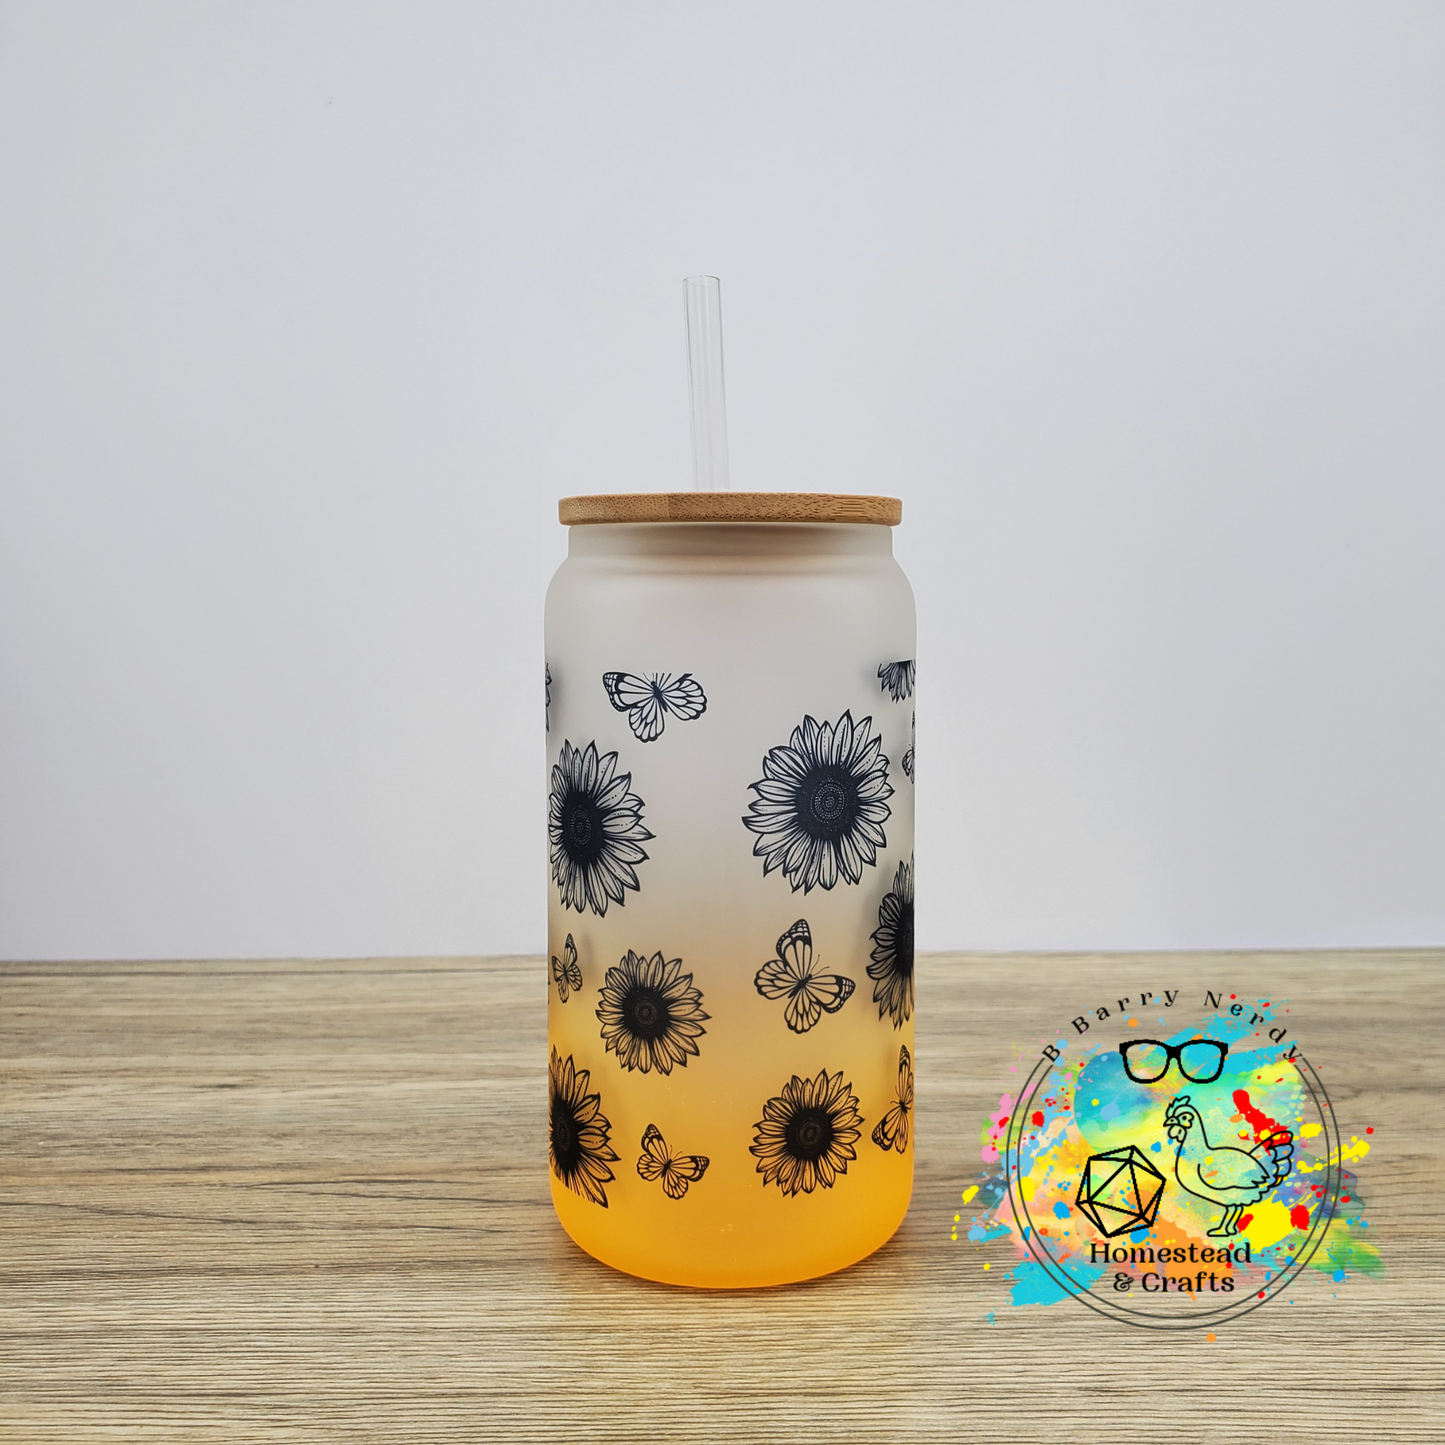 Classy but Cuss a Little, 16oz Sublimated Glass Can